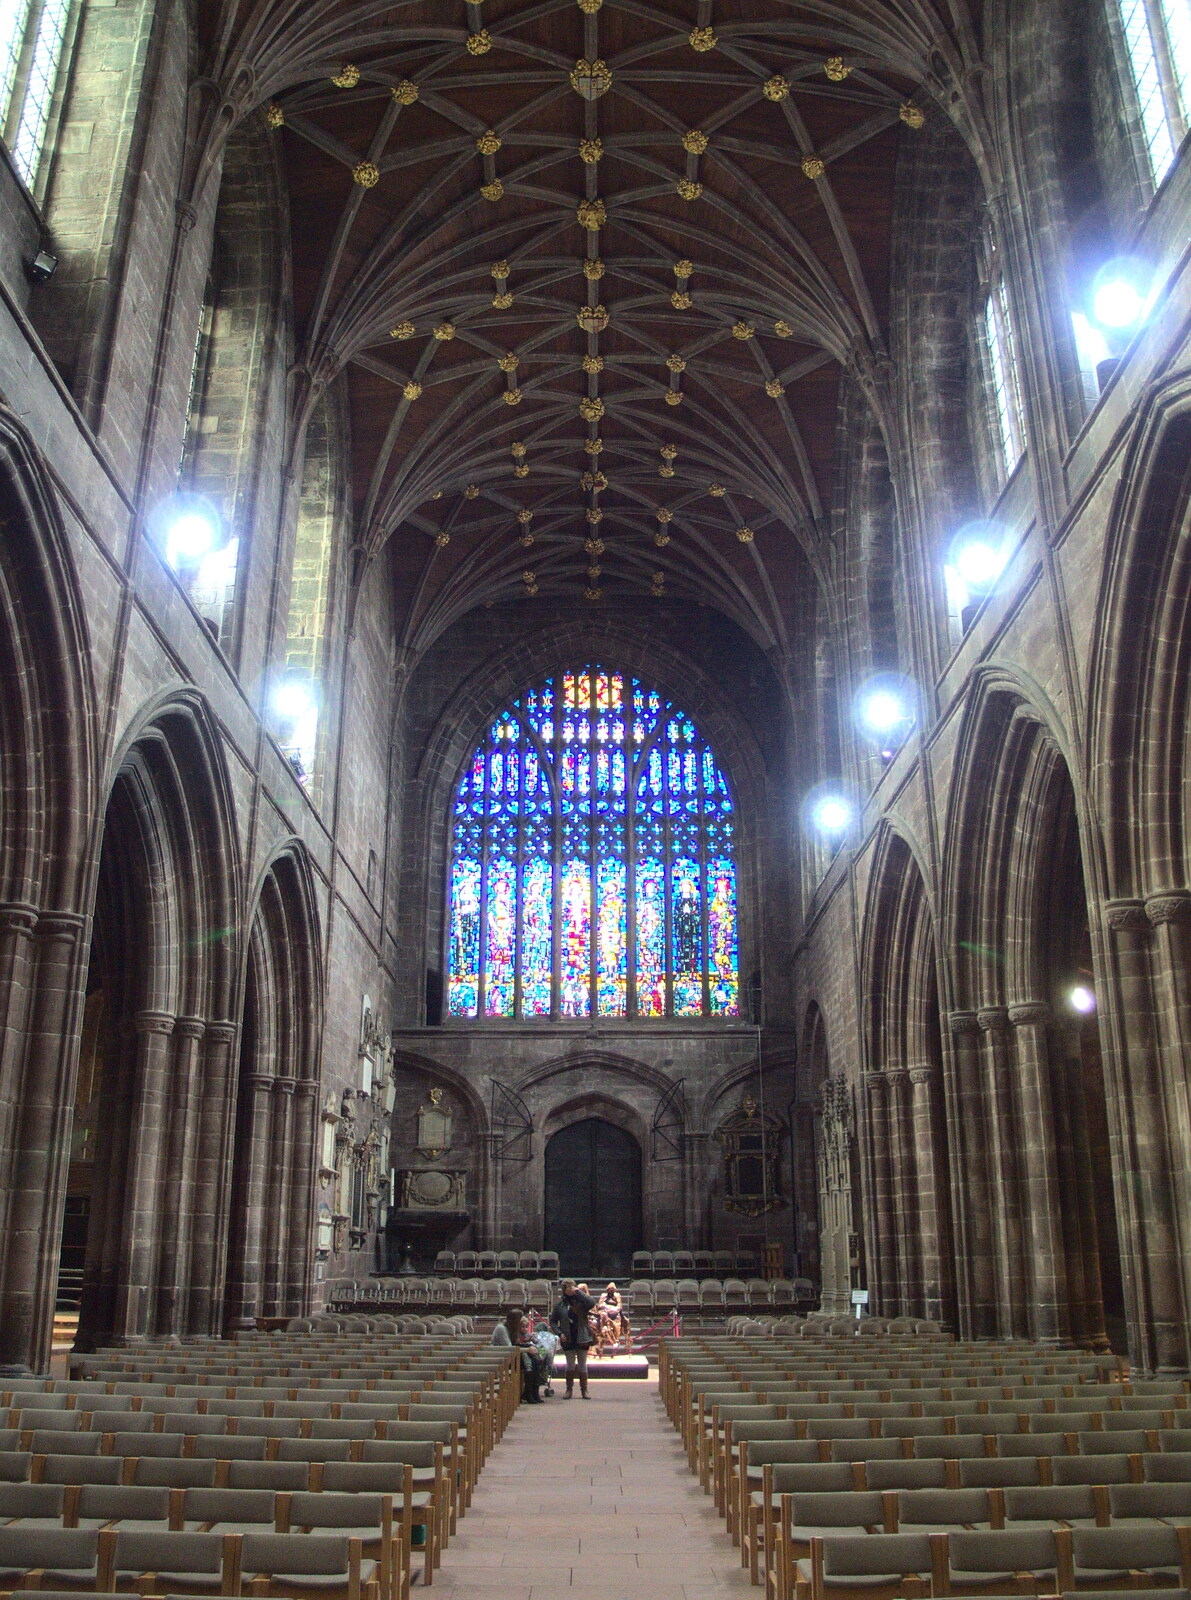 The nave of Chester Catherdral from A Party and a Road Trip to Chester, Suffolk and Cheshire - 20th December 2015